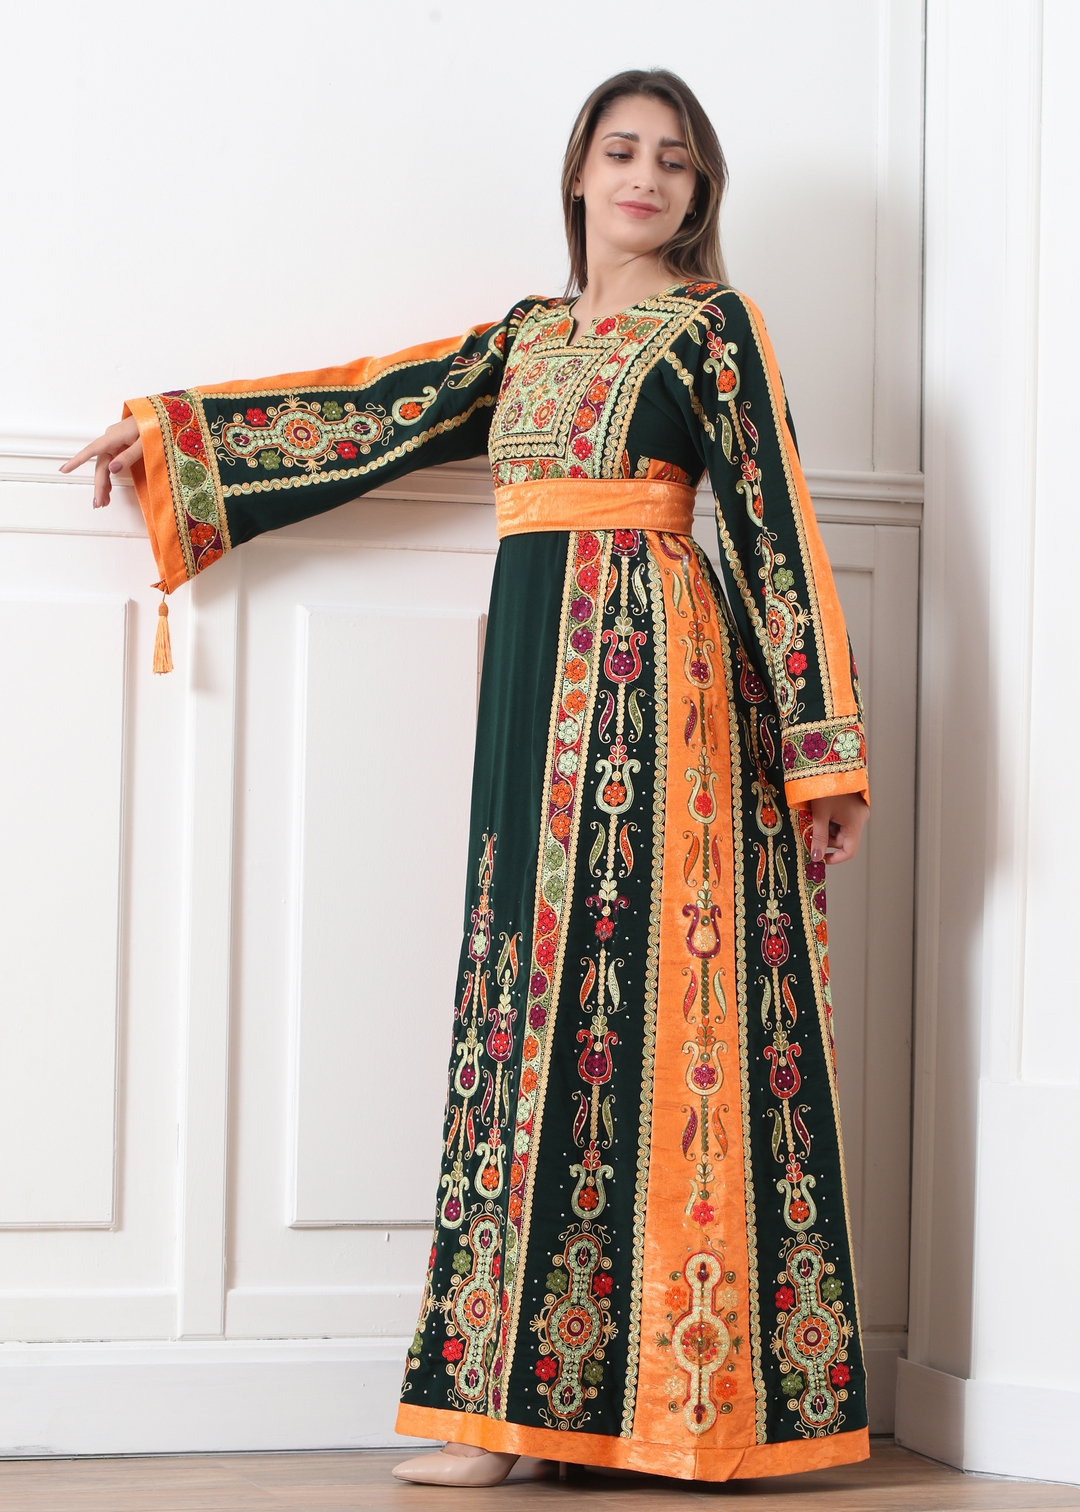 Olive Green & Orange Malak - Very High Quality Embroidered Palestinian style Thobe